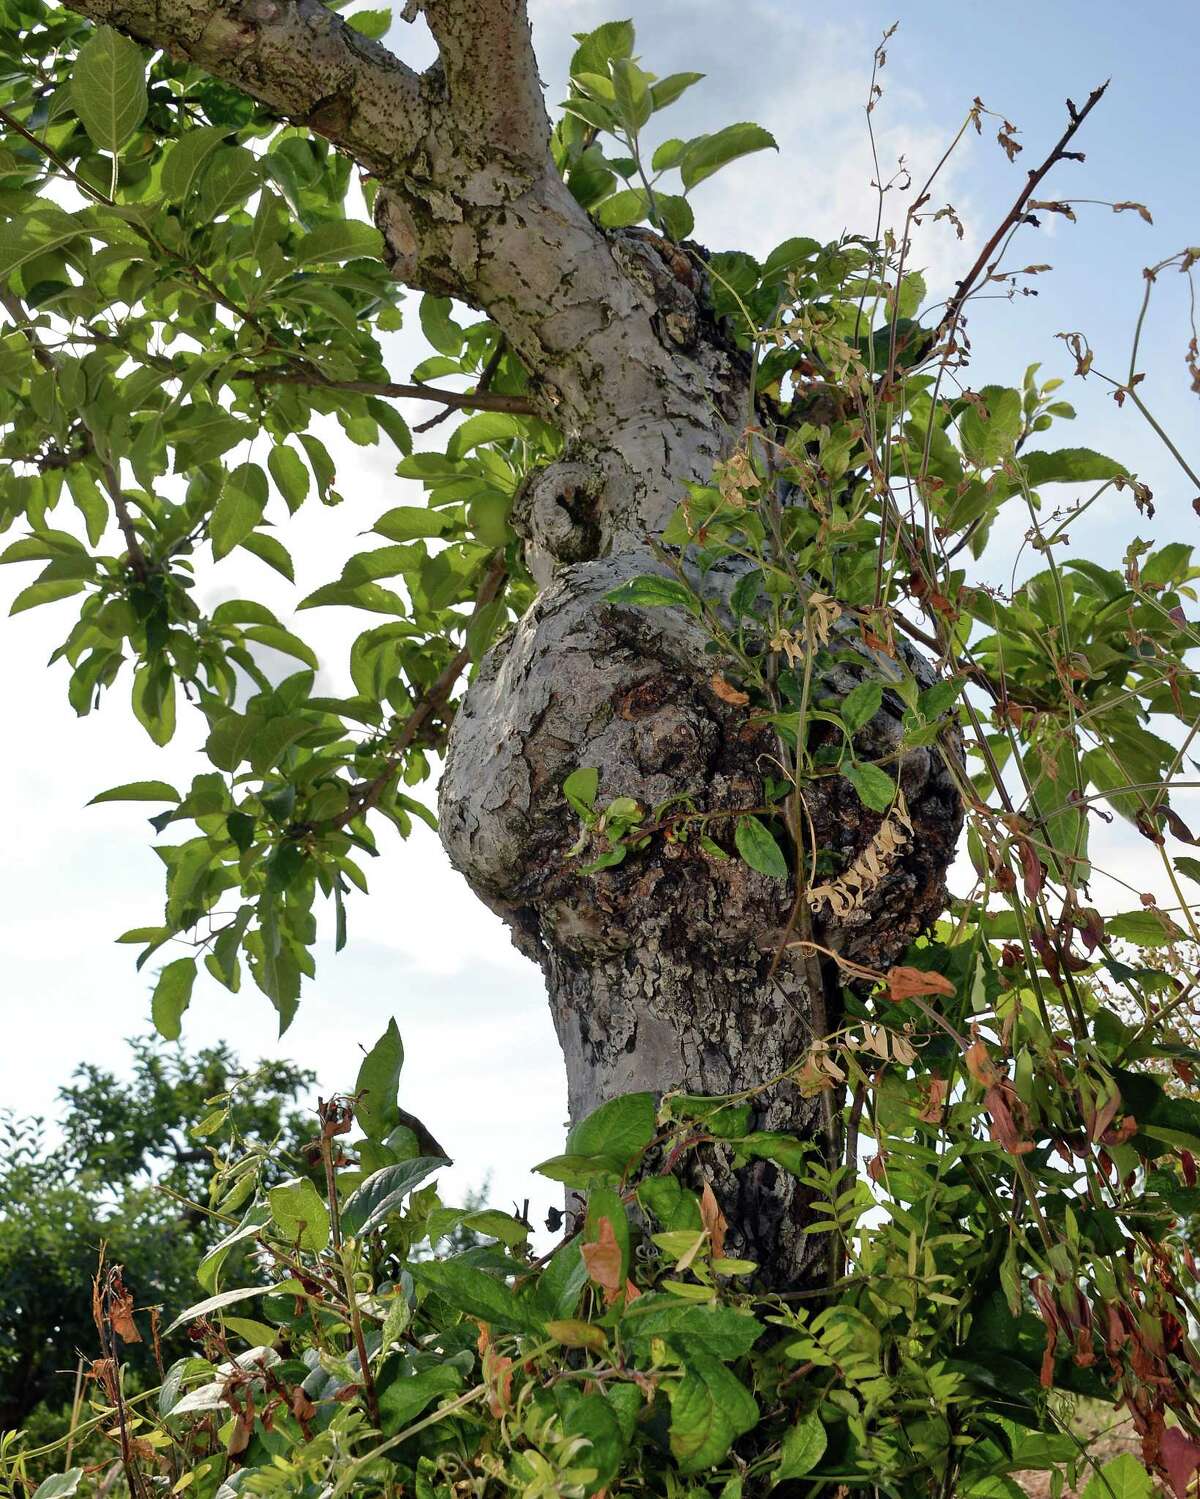 An apple tree planted in 1978 shows its root stock, bottom, below the tree's trunk at Indian Ladder Farms Wednesday June 28, 2017 in Altamont, NY. (John Carl D'Annibale / Times Union)